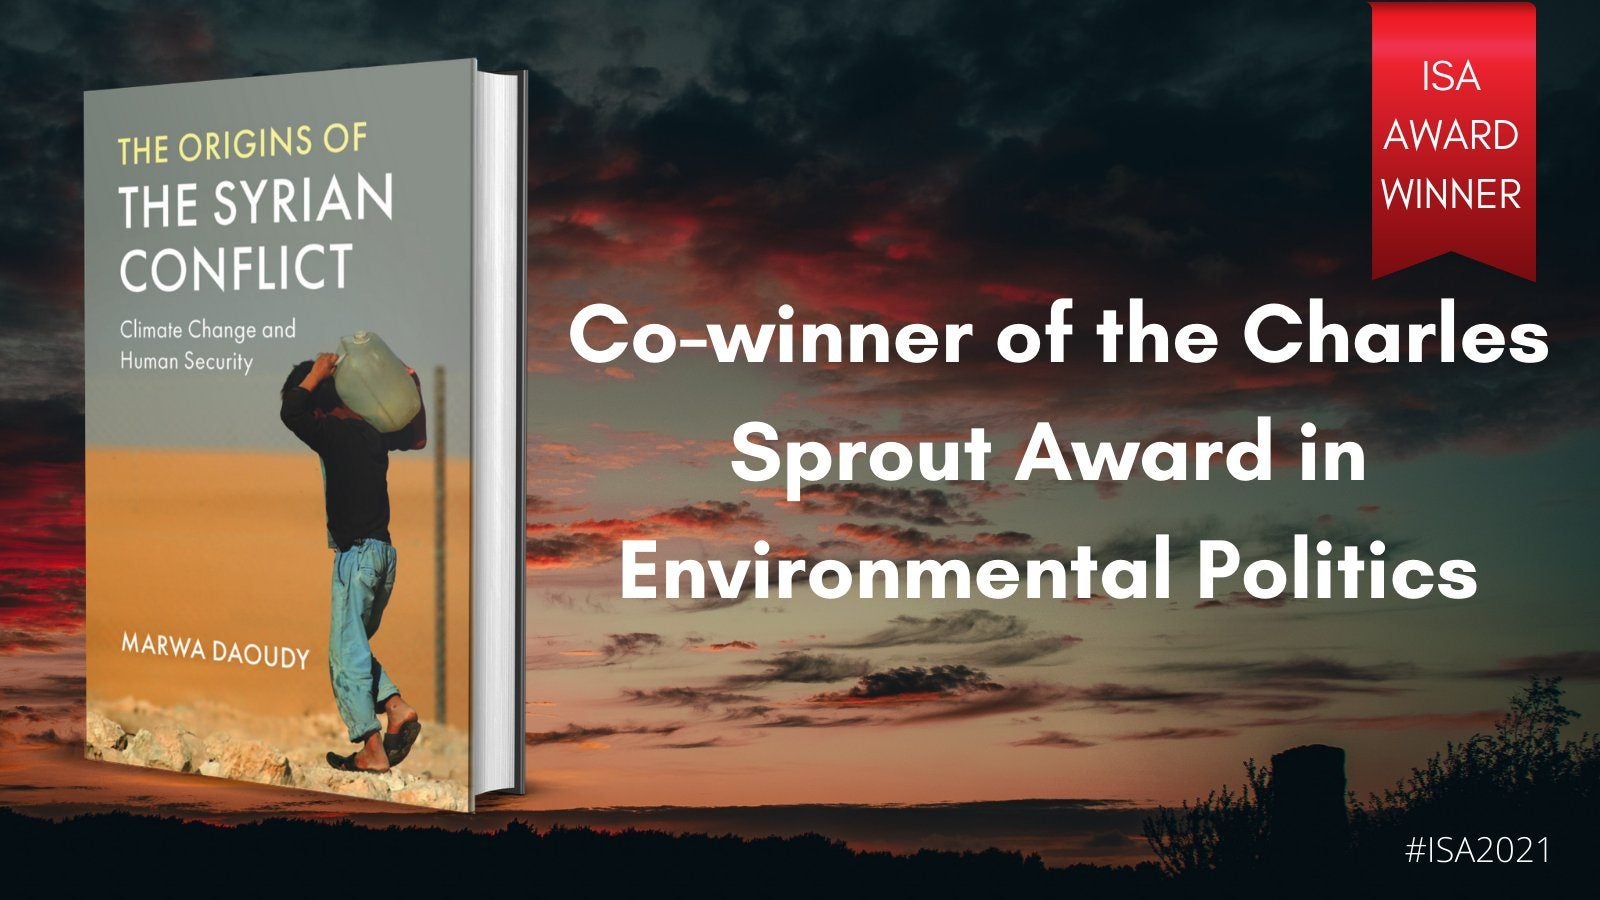 Background of a sunset overlaid by an image of the book Origins of the Syrian Conflict and text that says Co-winner of the Sprout Award in Environmental Politics